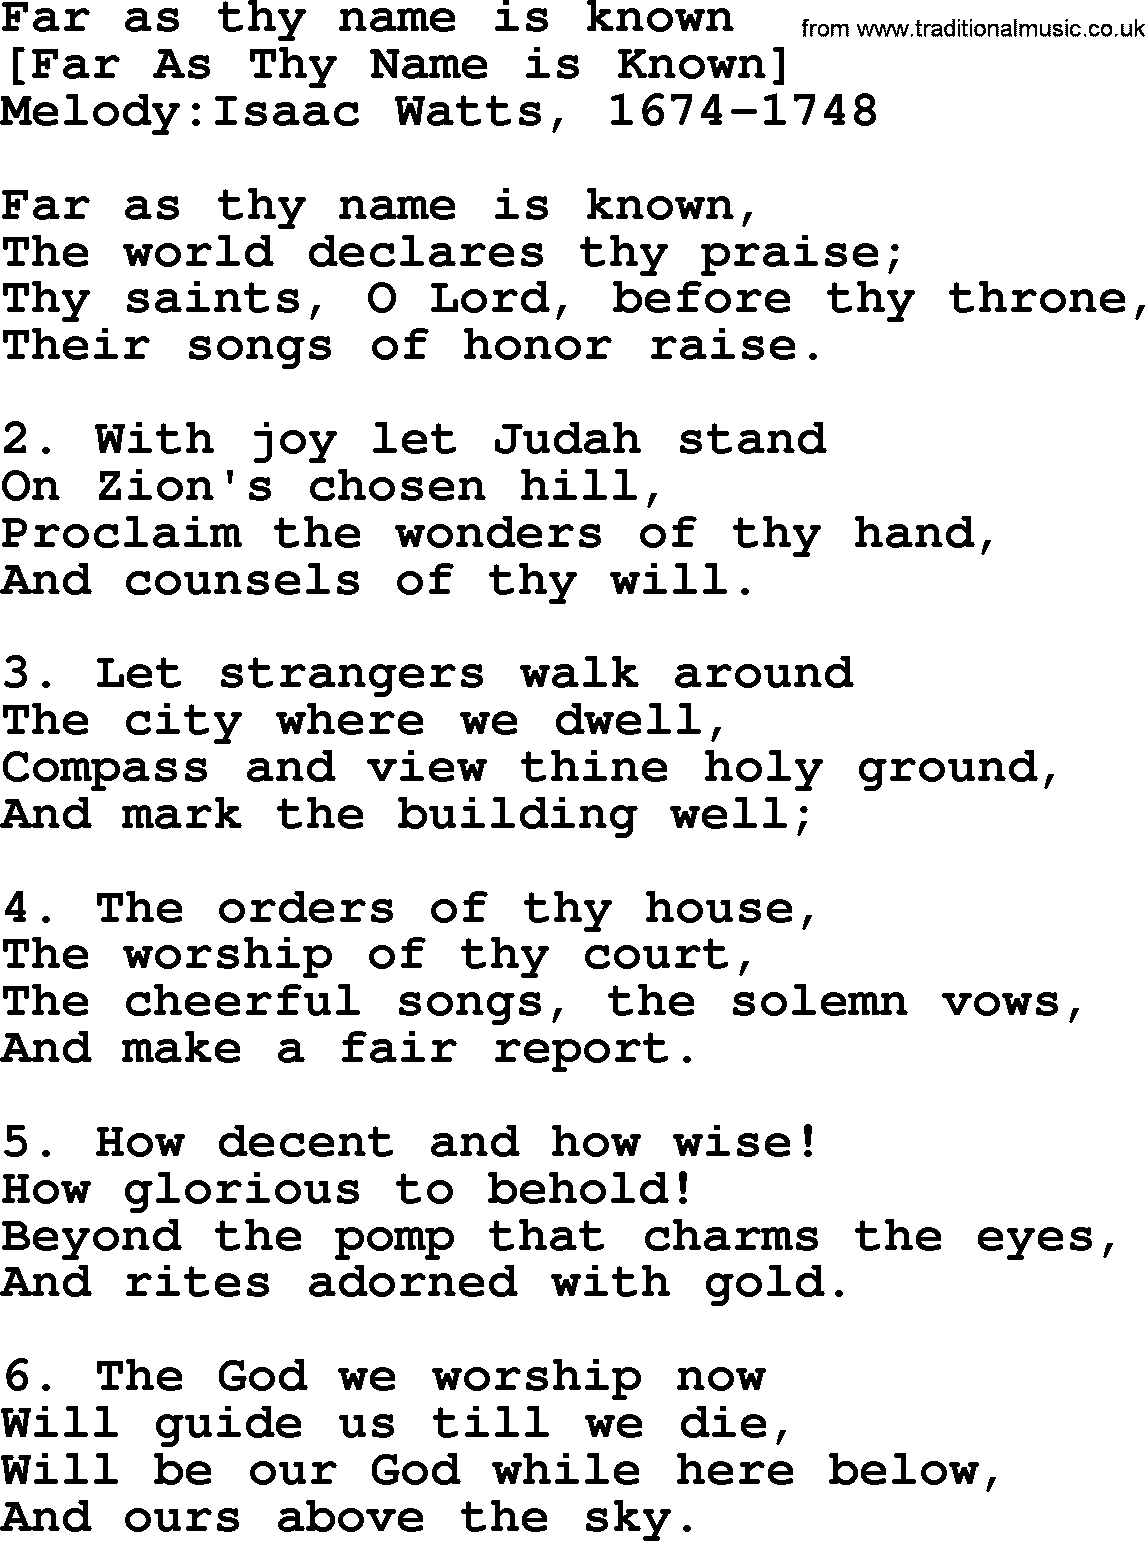 Old English Song: Far As Thy Name Is Known lyrics